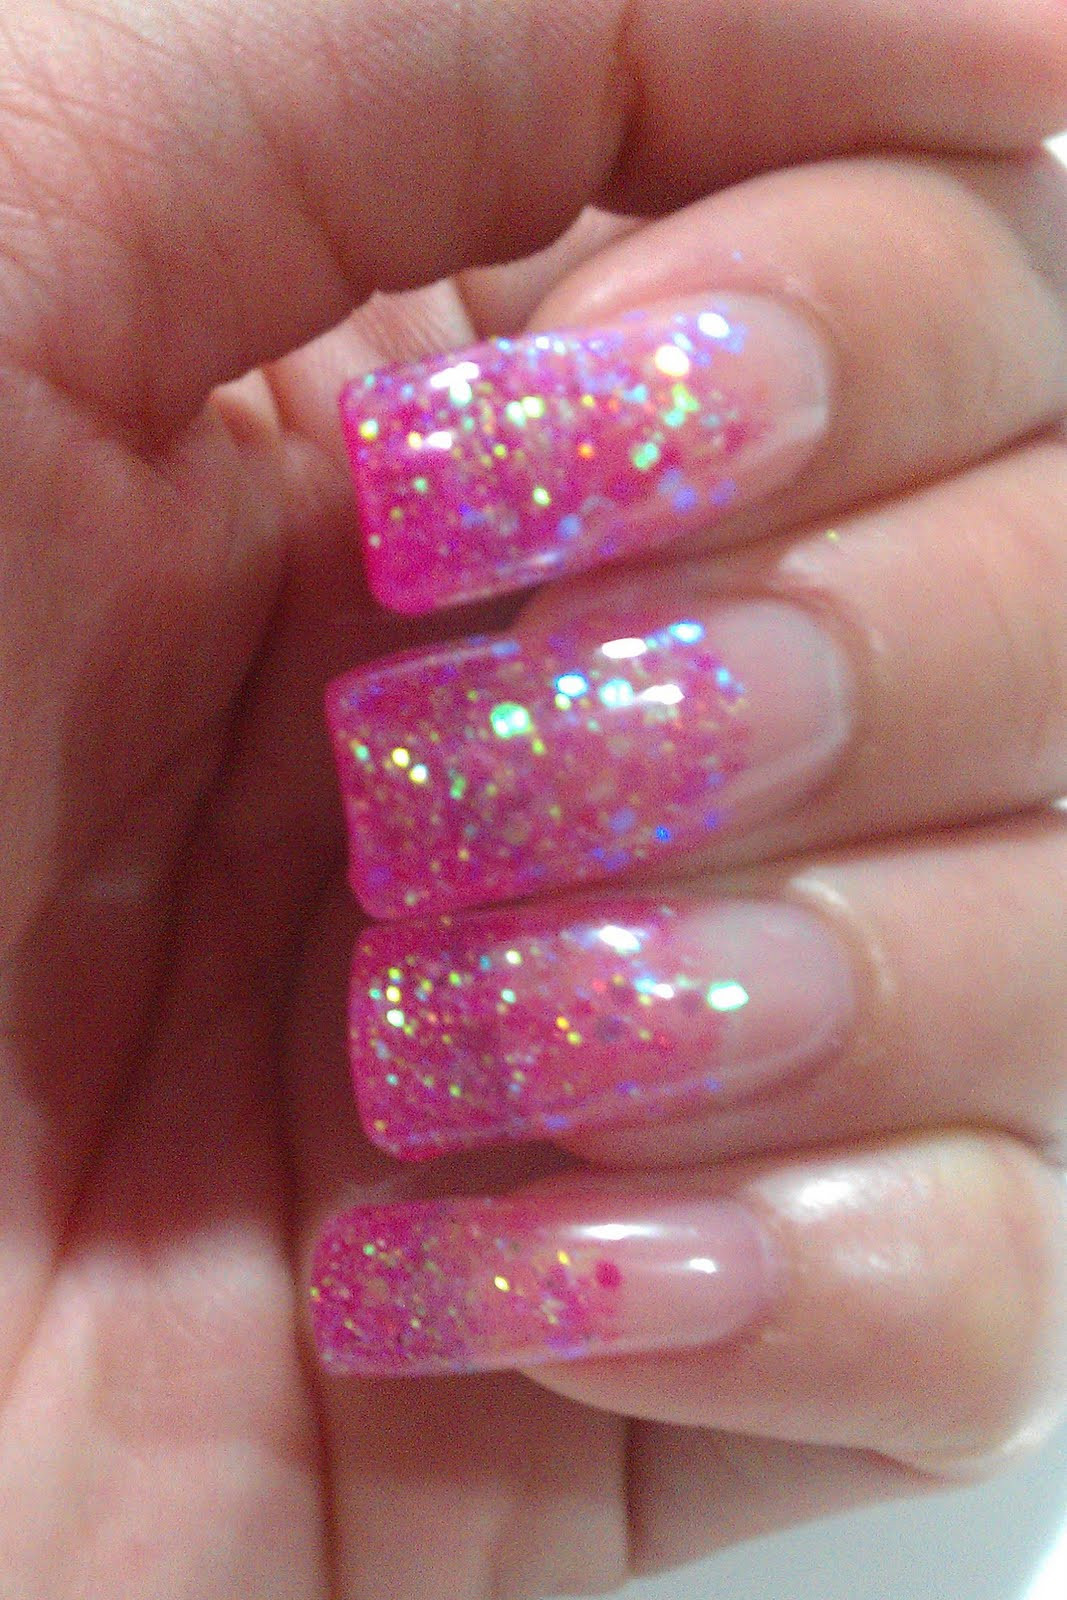 Nail Designs With Glitter
 The Clover Beauty Inn NOTD Pink Glitter Gel Nails